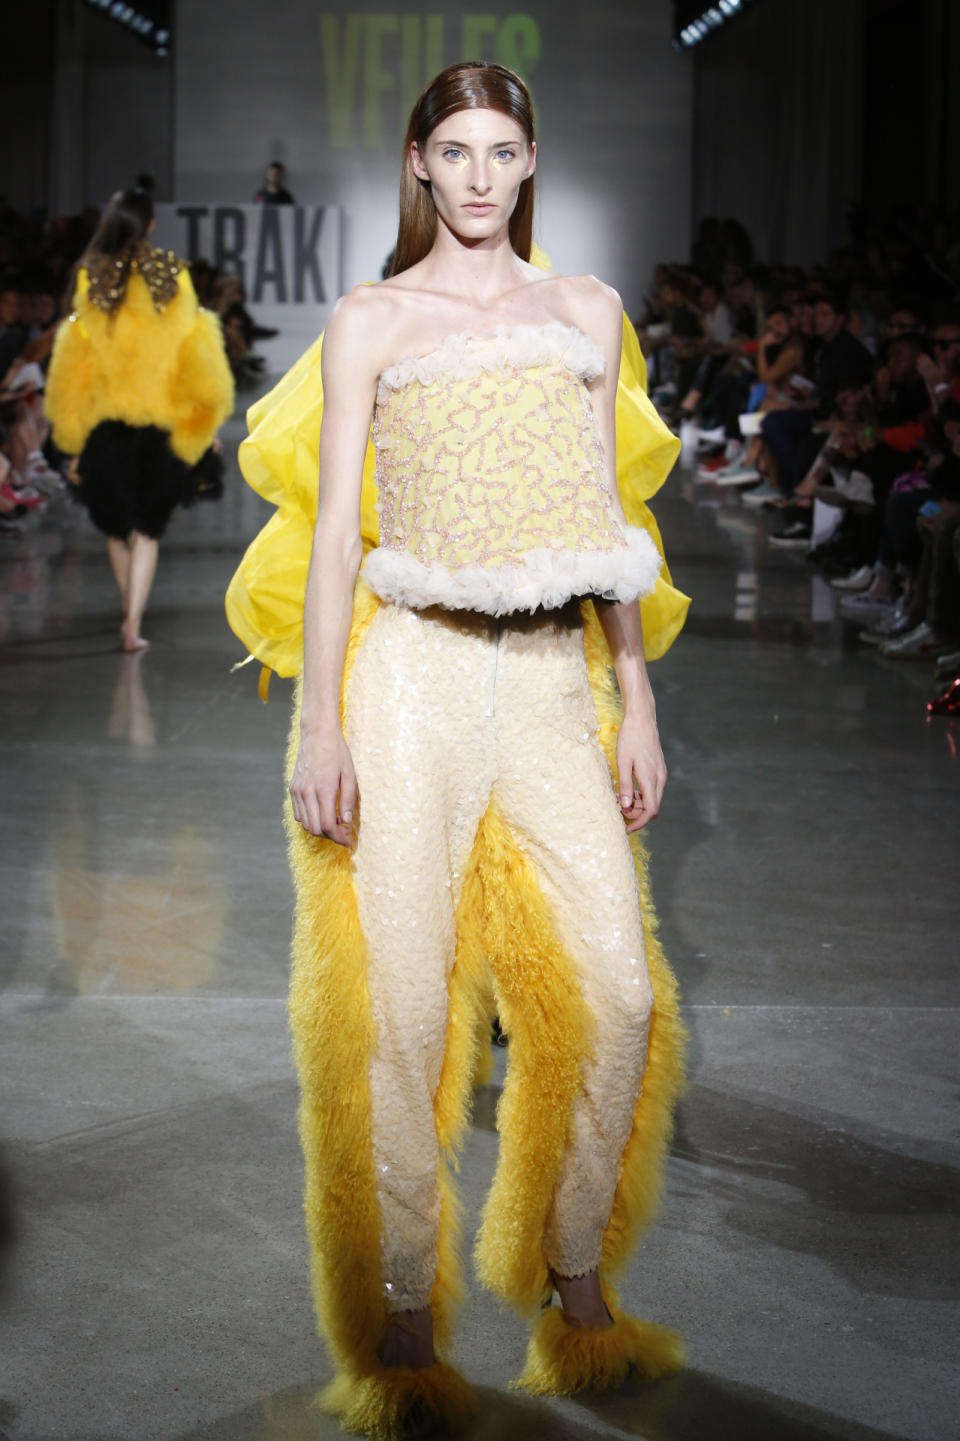 Top and Pants With Fur Backing by David Ferreira